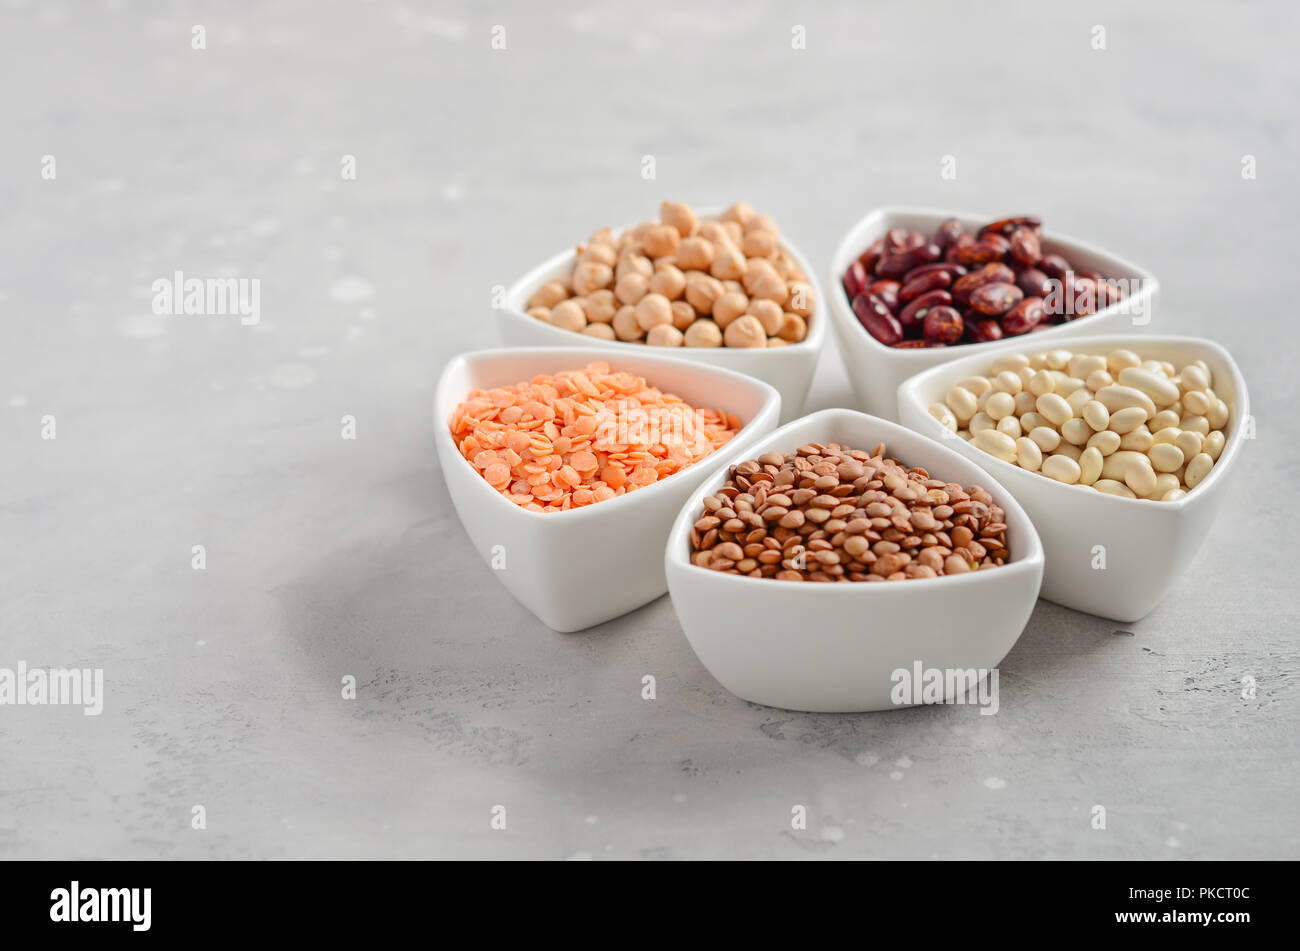 Selection of dry legumes, lentils and peas in white bowls on gray concrete background. Stock Photo